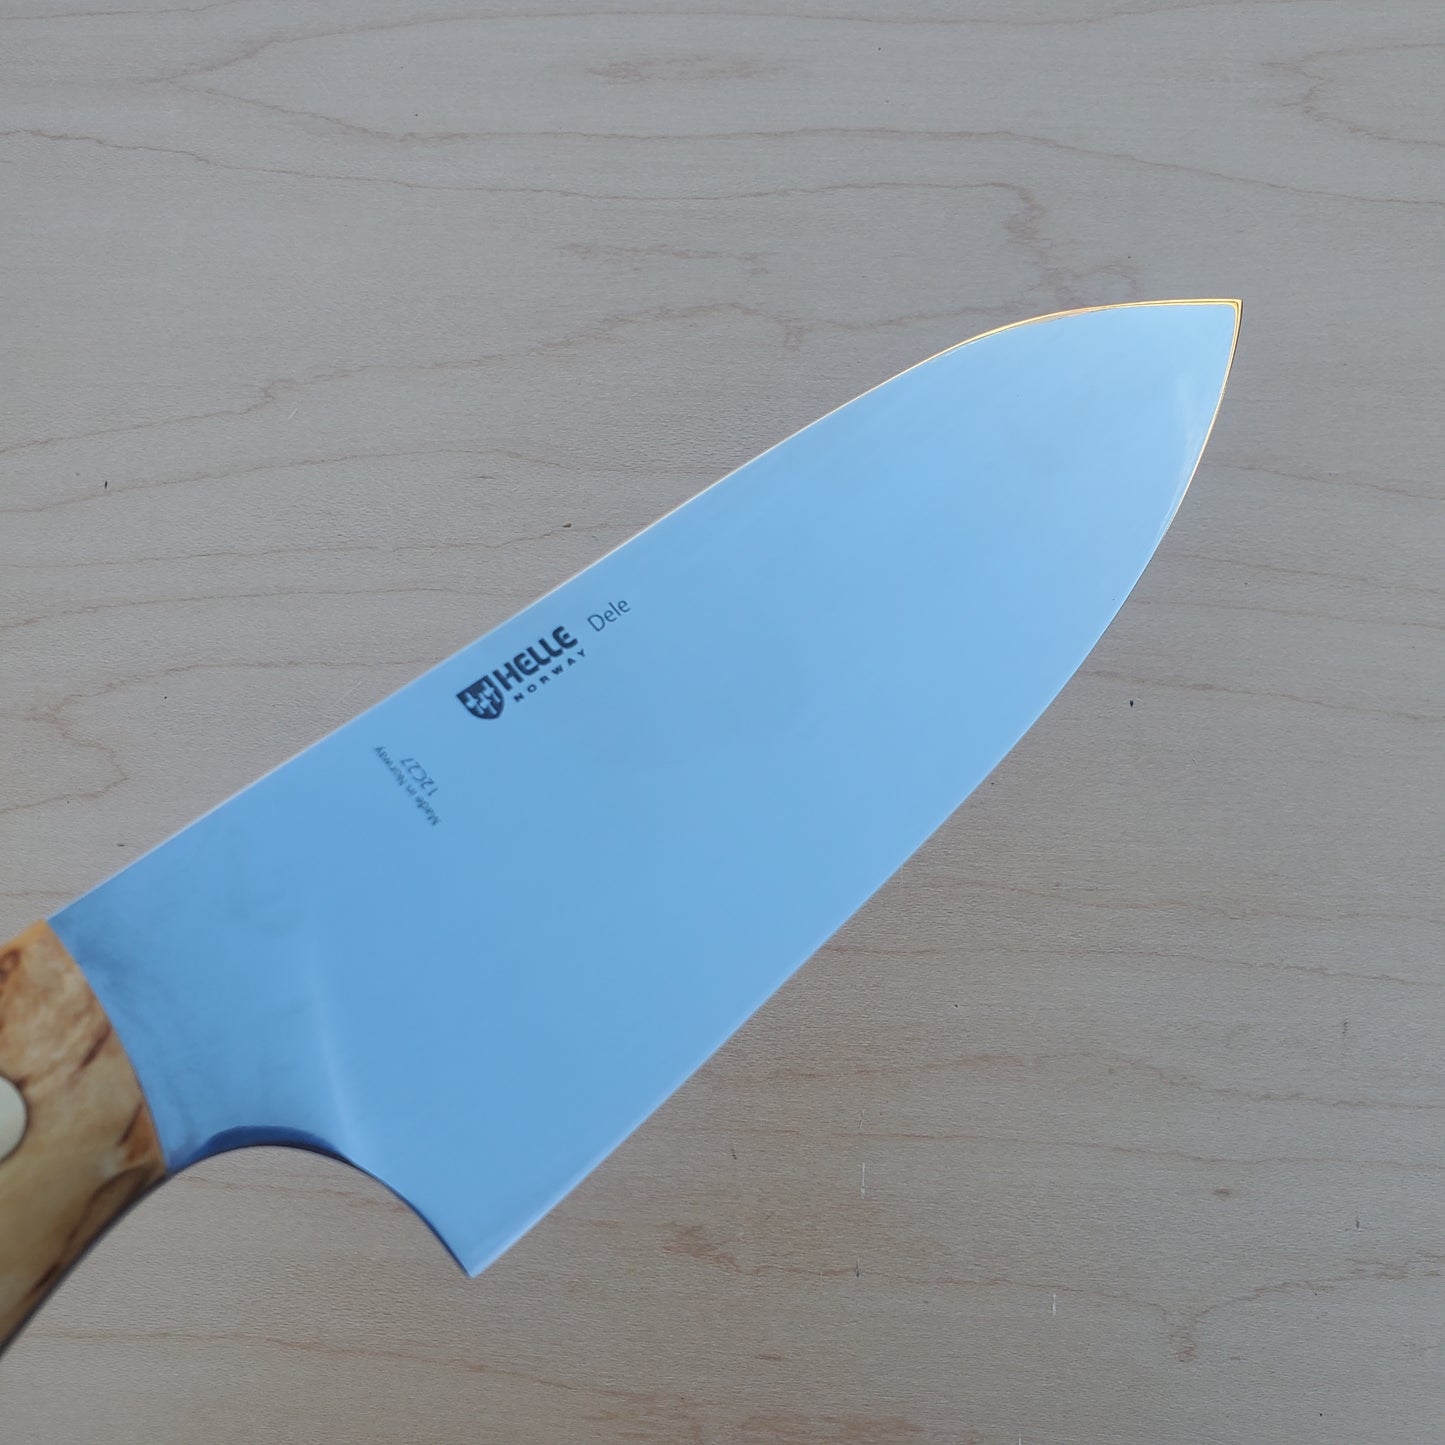 Helle Dele Outdoor Chef Knife